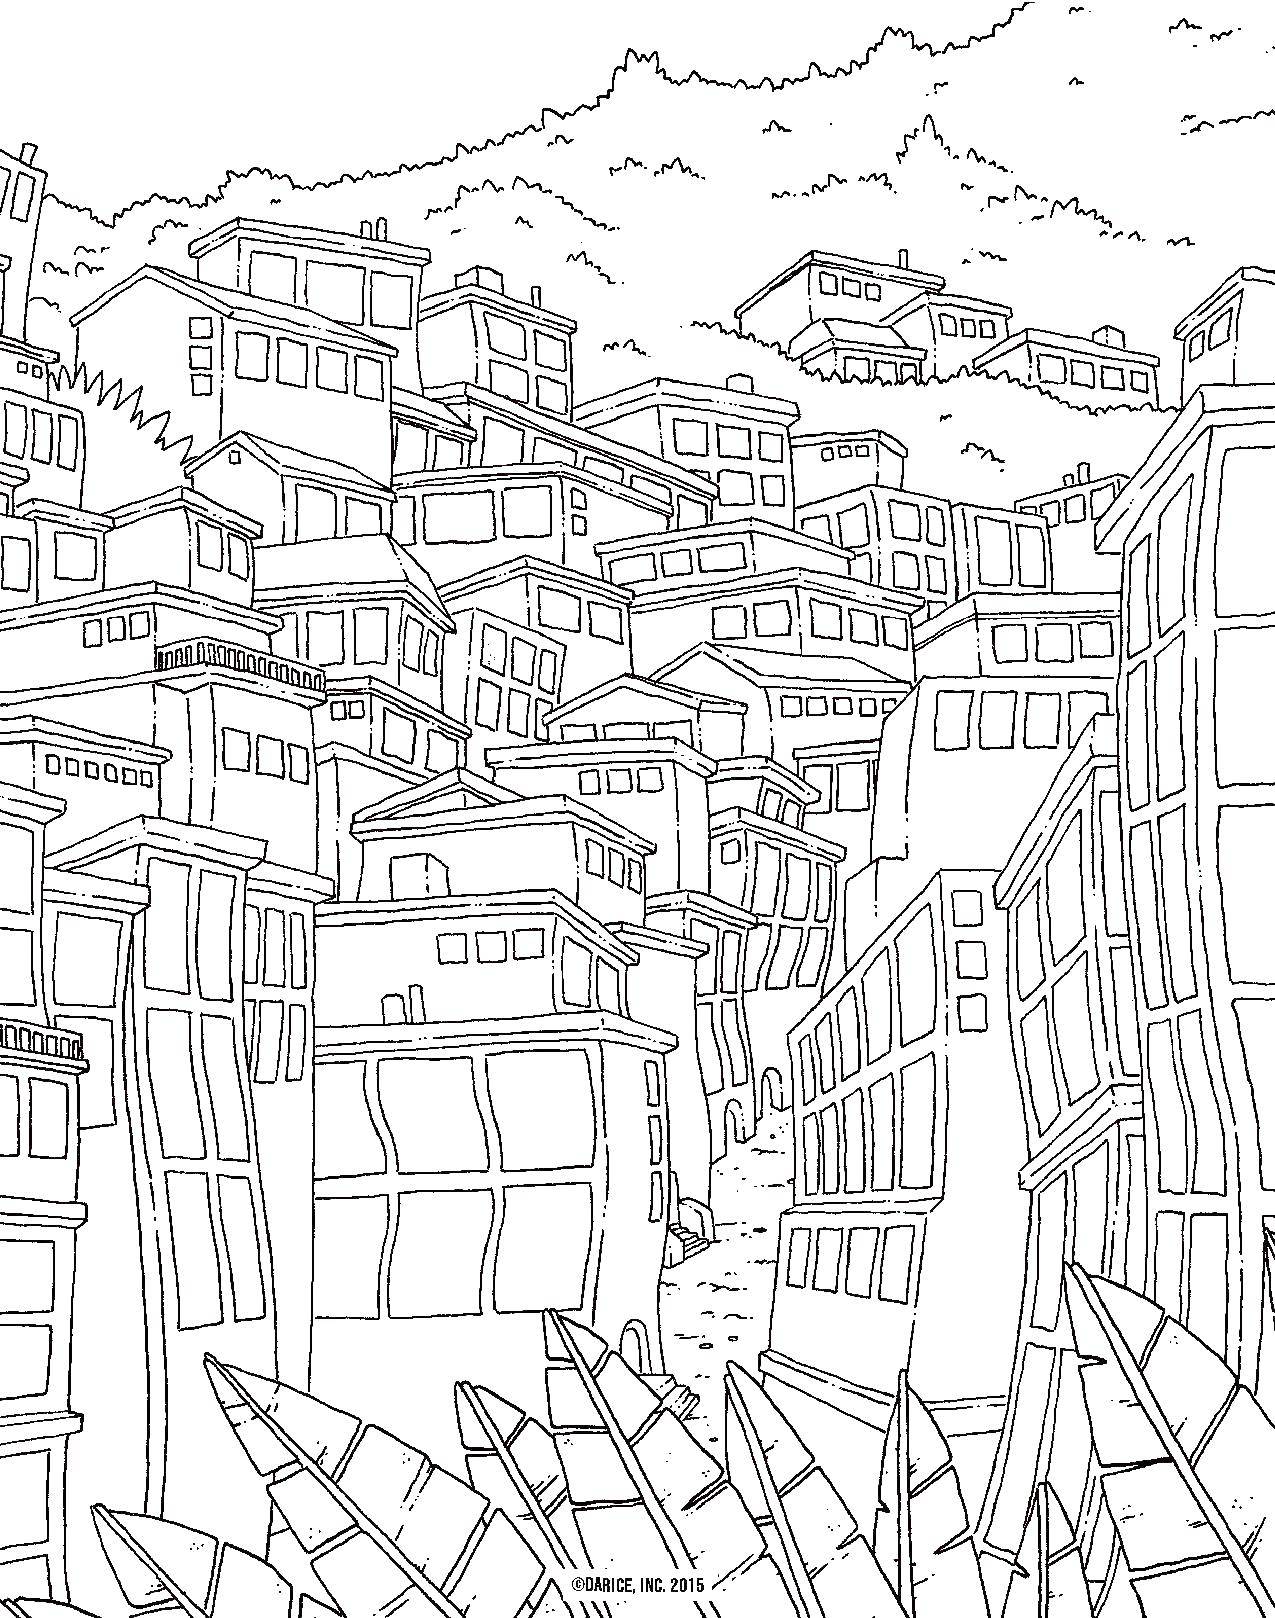 Coloring The city. Category the city. Tags:  city, home.